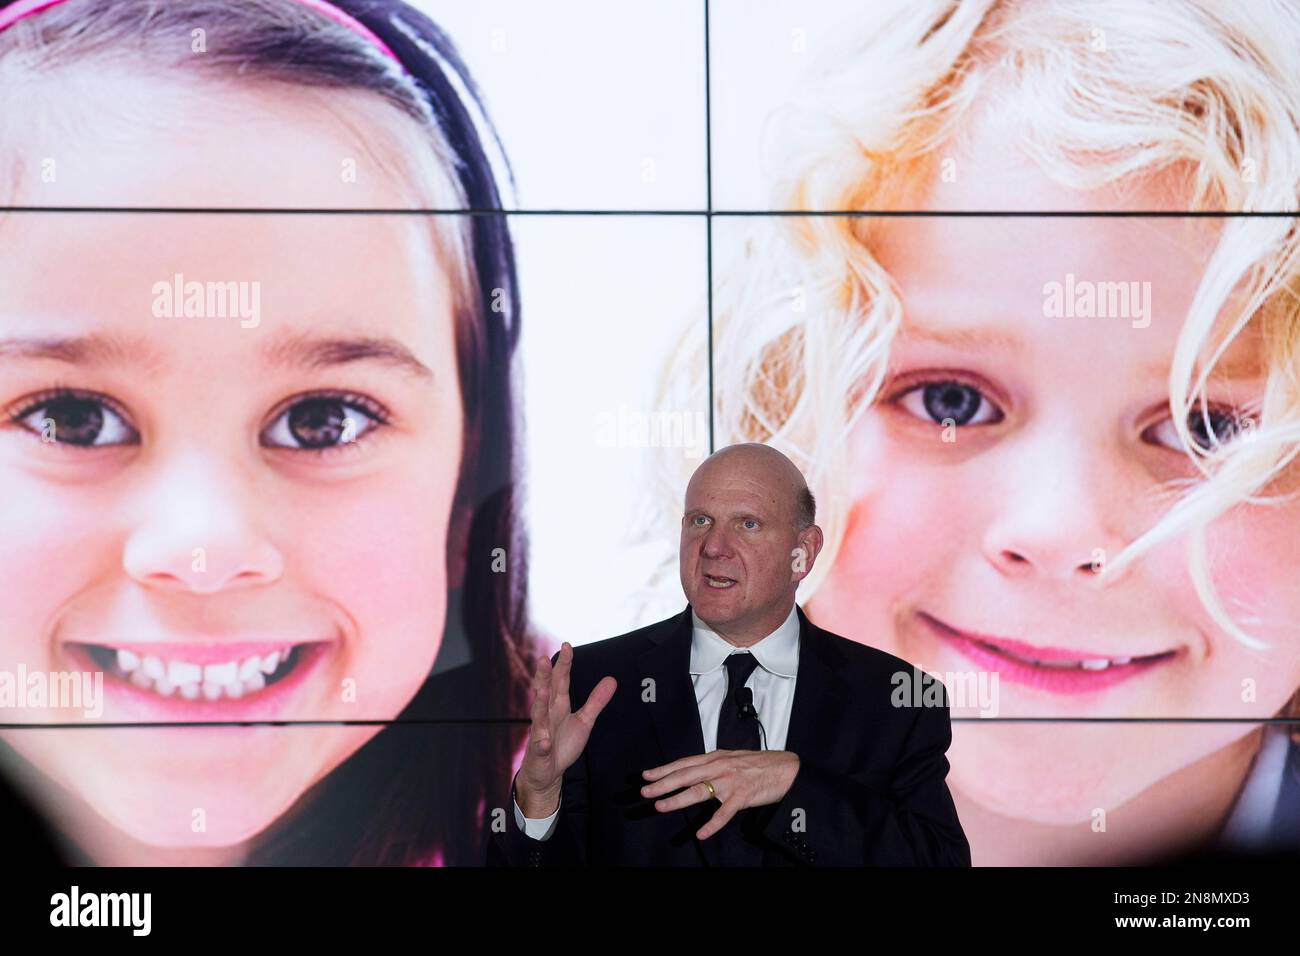 Microsoft CEO Steve Ballmer delivers a speech during the launch of the German kindergarten education software Schlaumaeuse (clever mice) for the new Windows 8 operating system in Berlin, Thursday, Nov. 8, 2012. (AP Photo/Markus Schreiber) Stock Photo